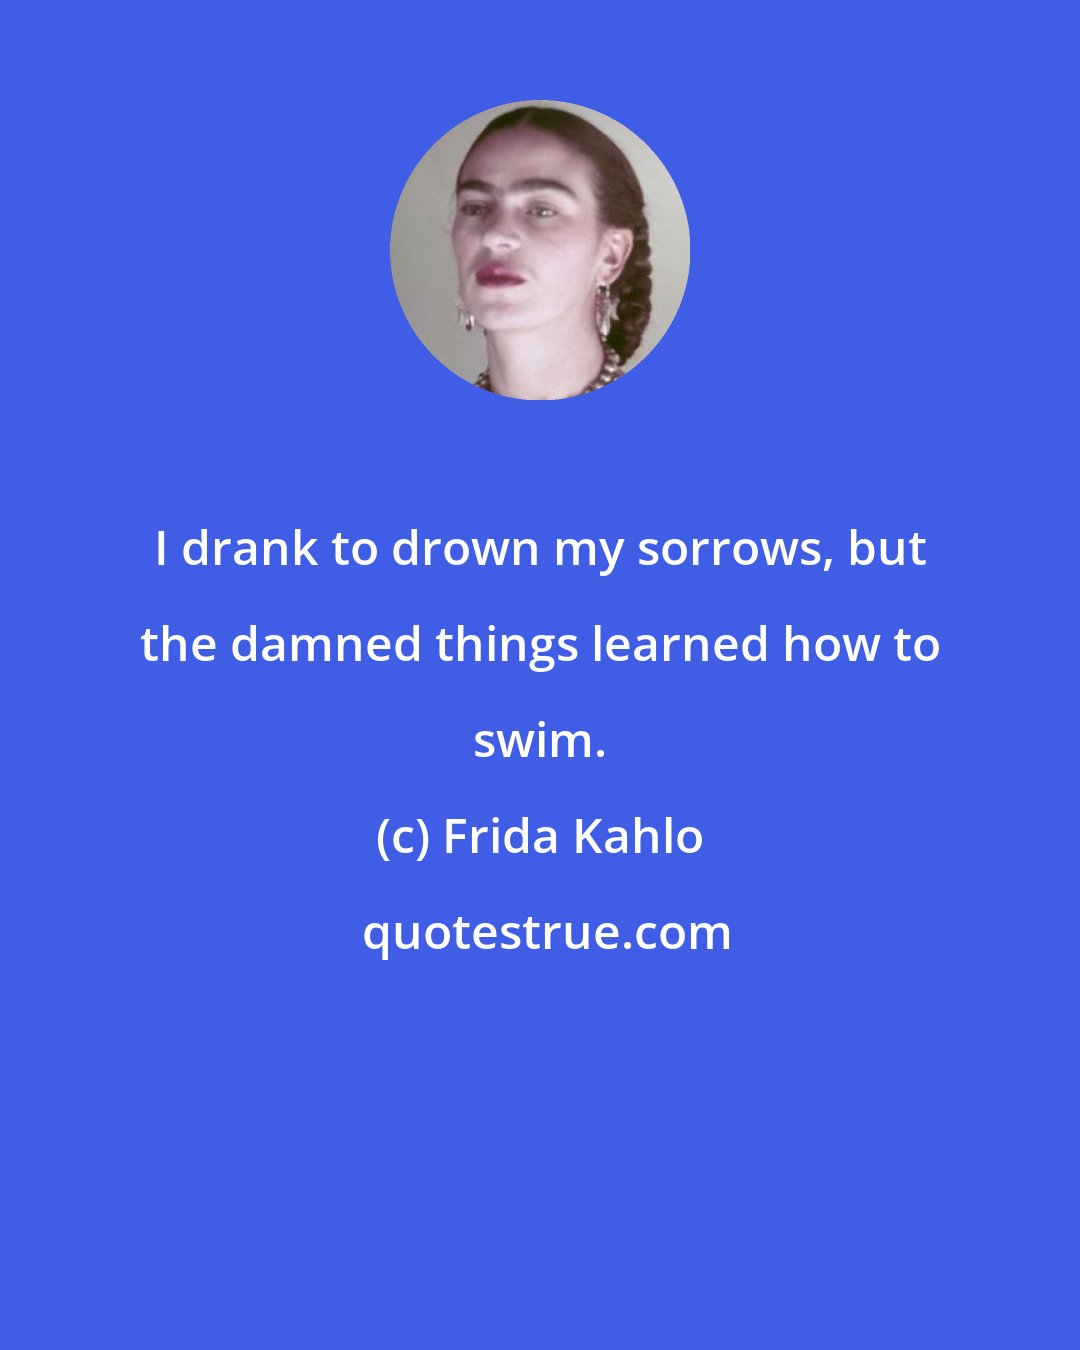 Frida Kahlo: I drank to drown my sorrows, but the damned things learned how to swim.